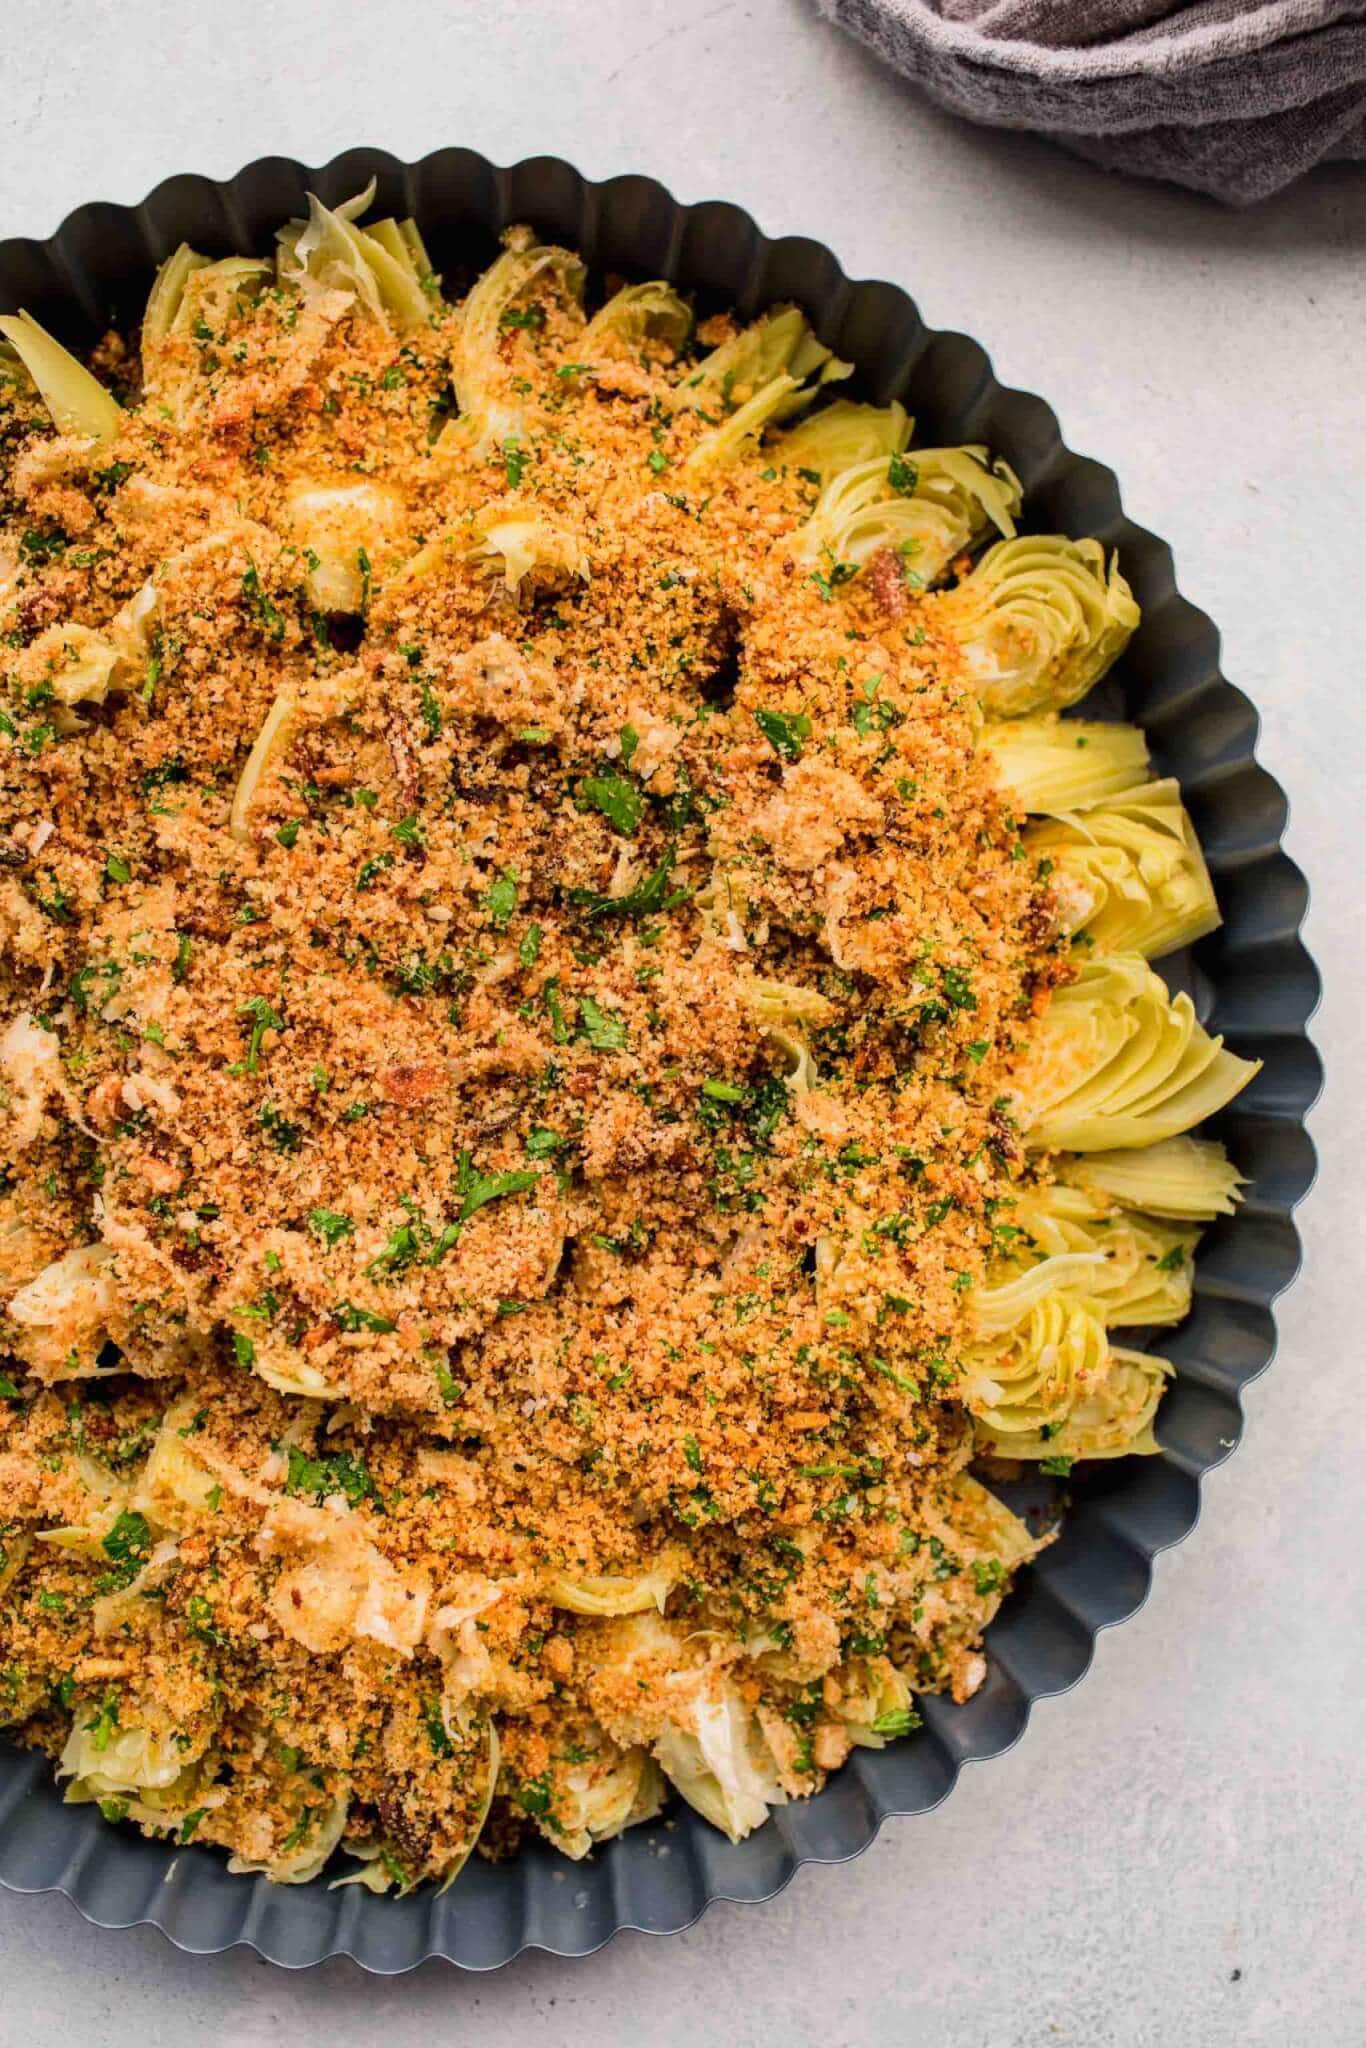 Artichoke hearts topped with breadcrumbs before baking.